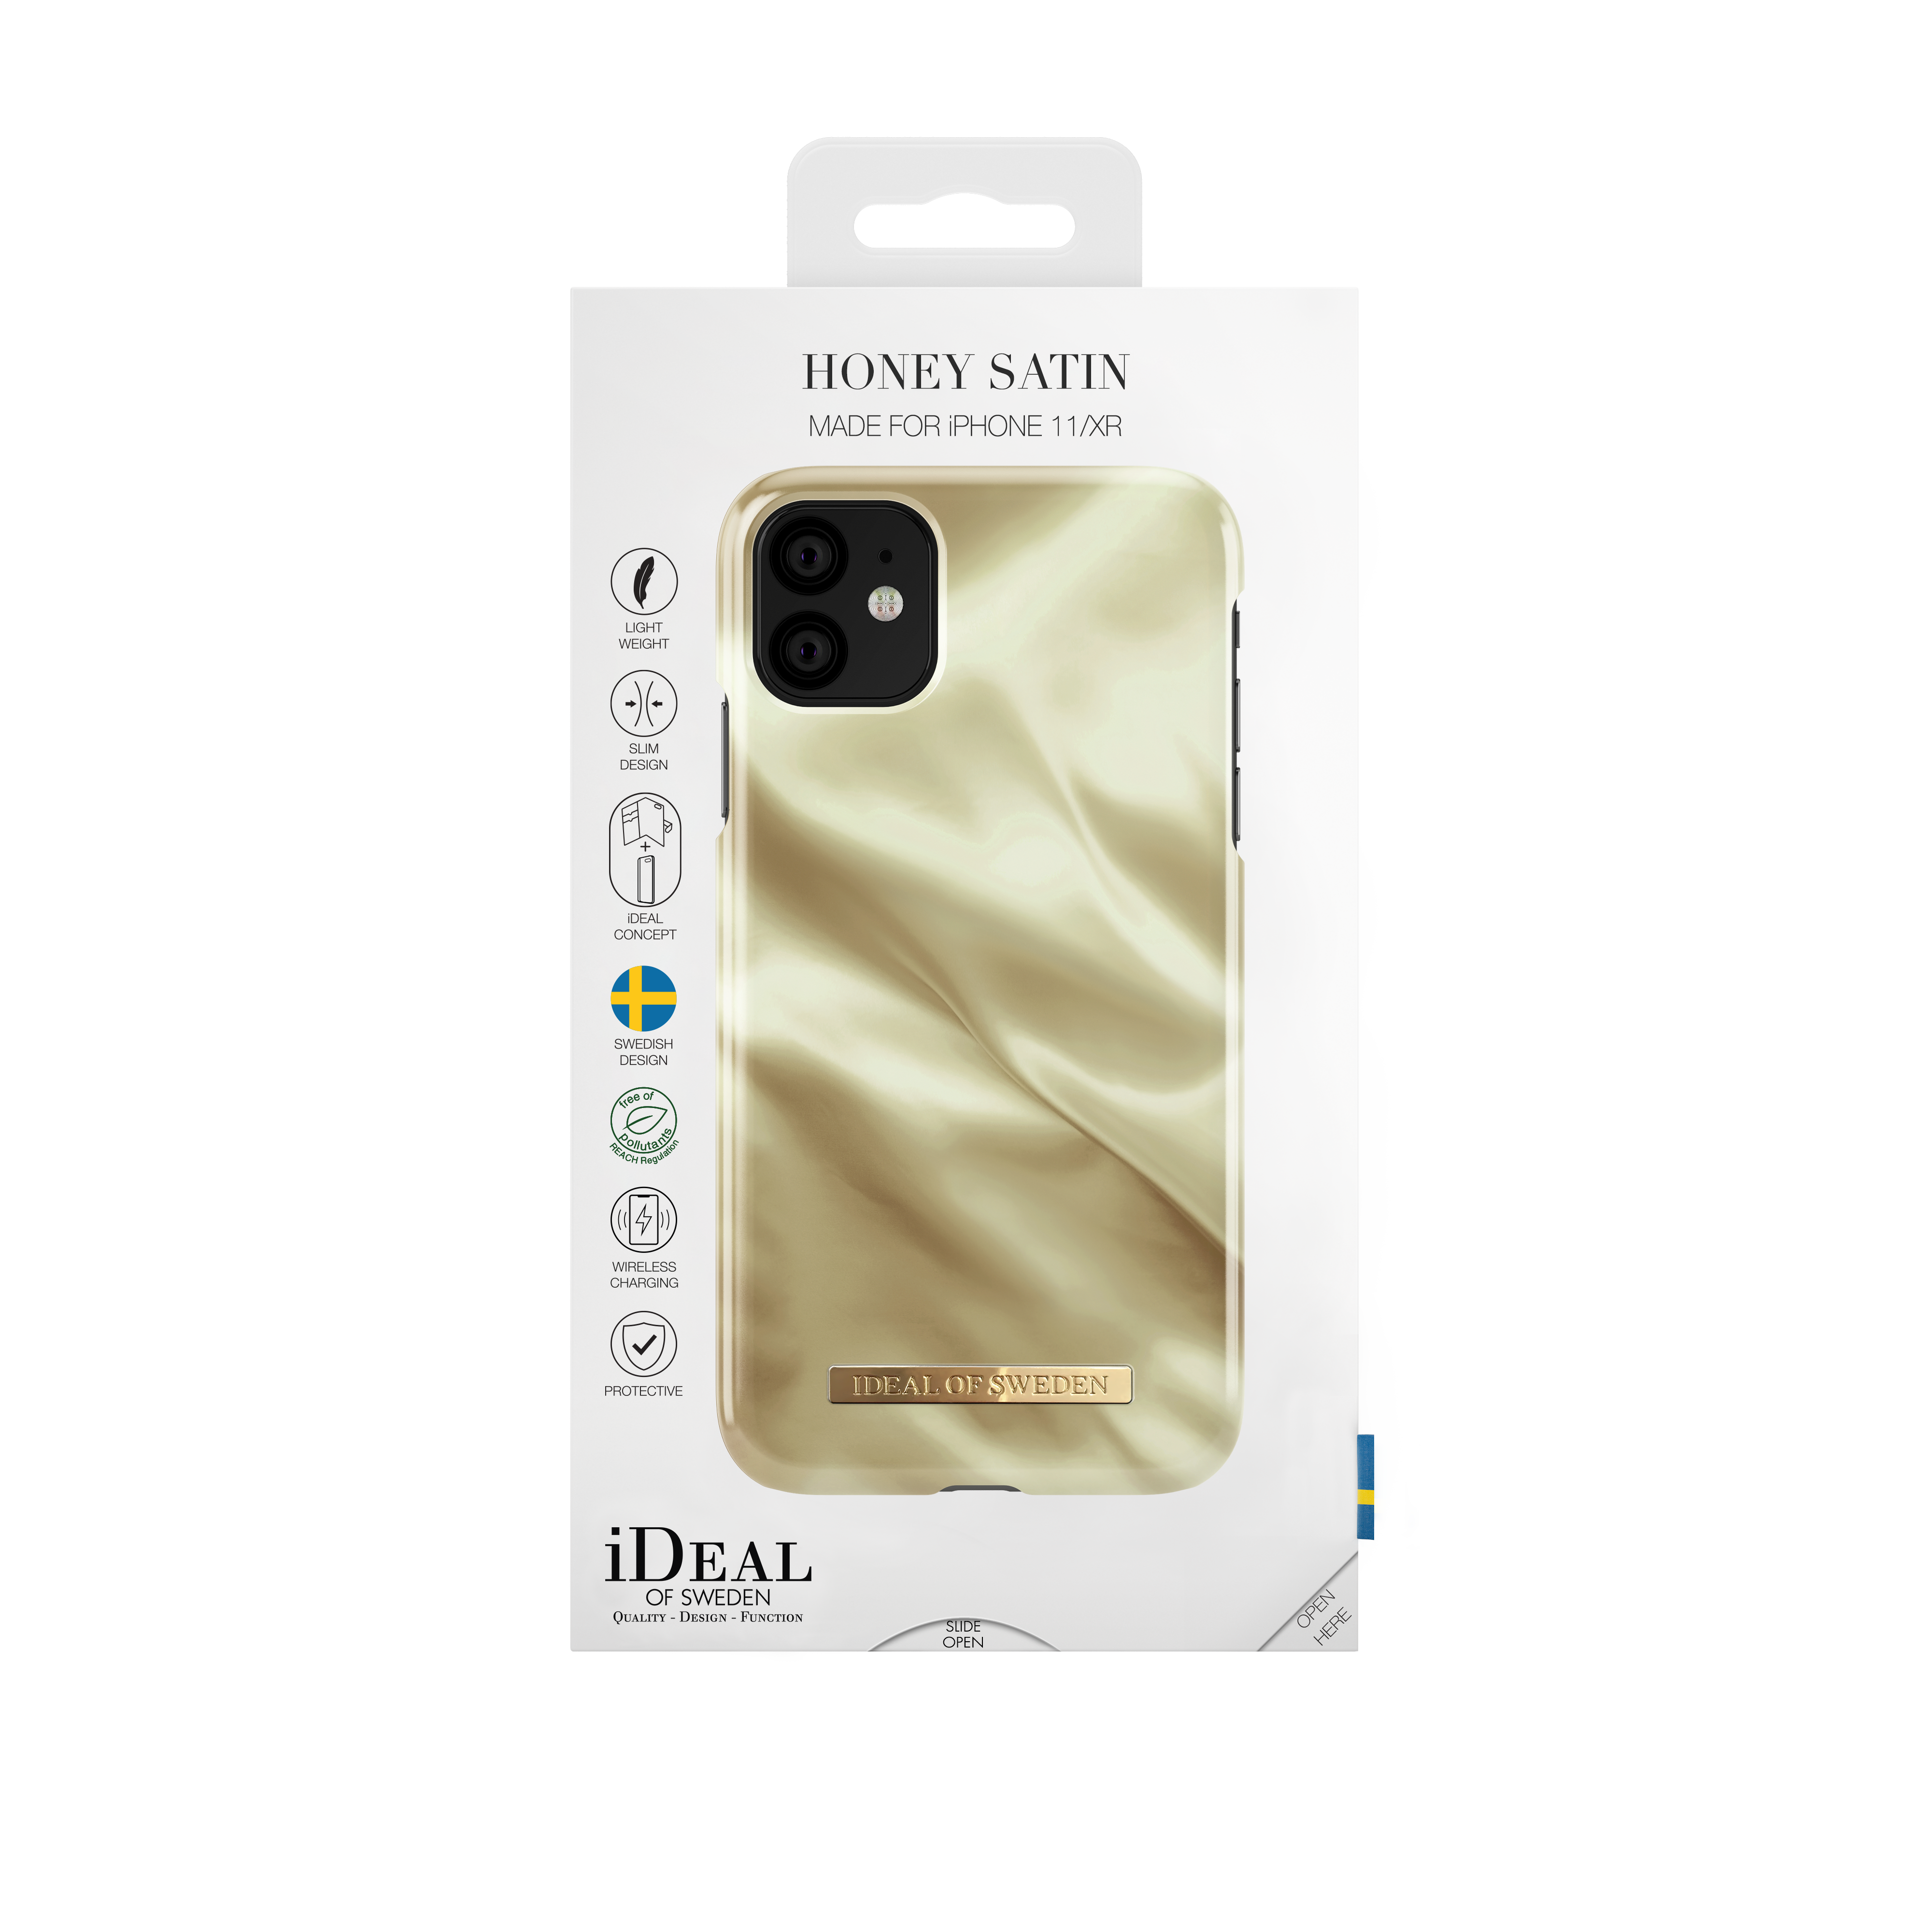 iPhone Apple, Honey SWEDEN IDFCSC19-I1961-188, iPhone Satin 11, IDEAL XR, OF Backcover,